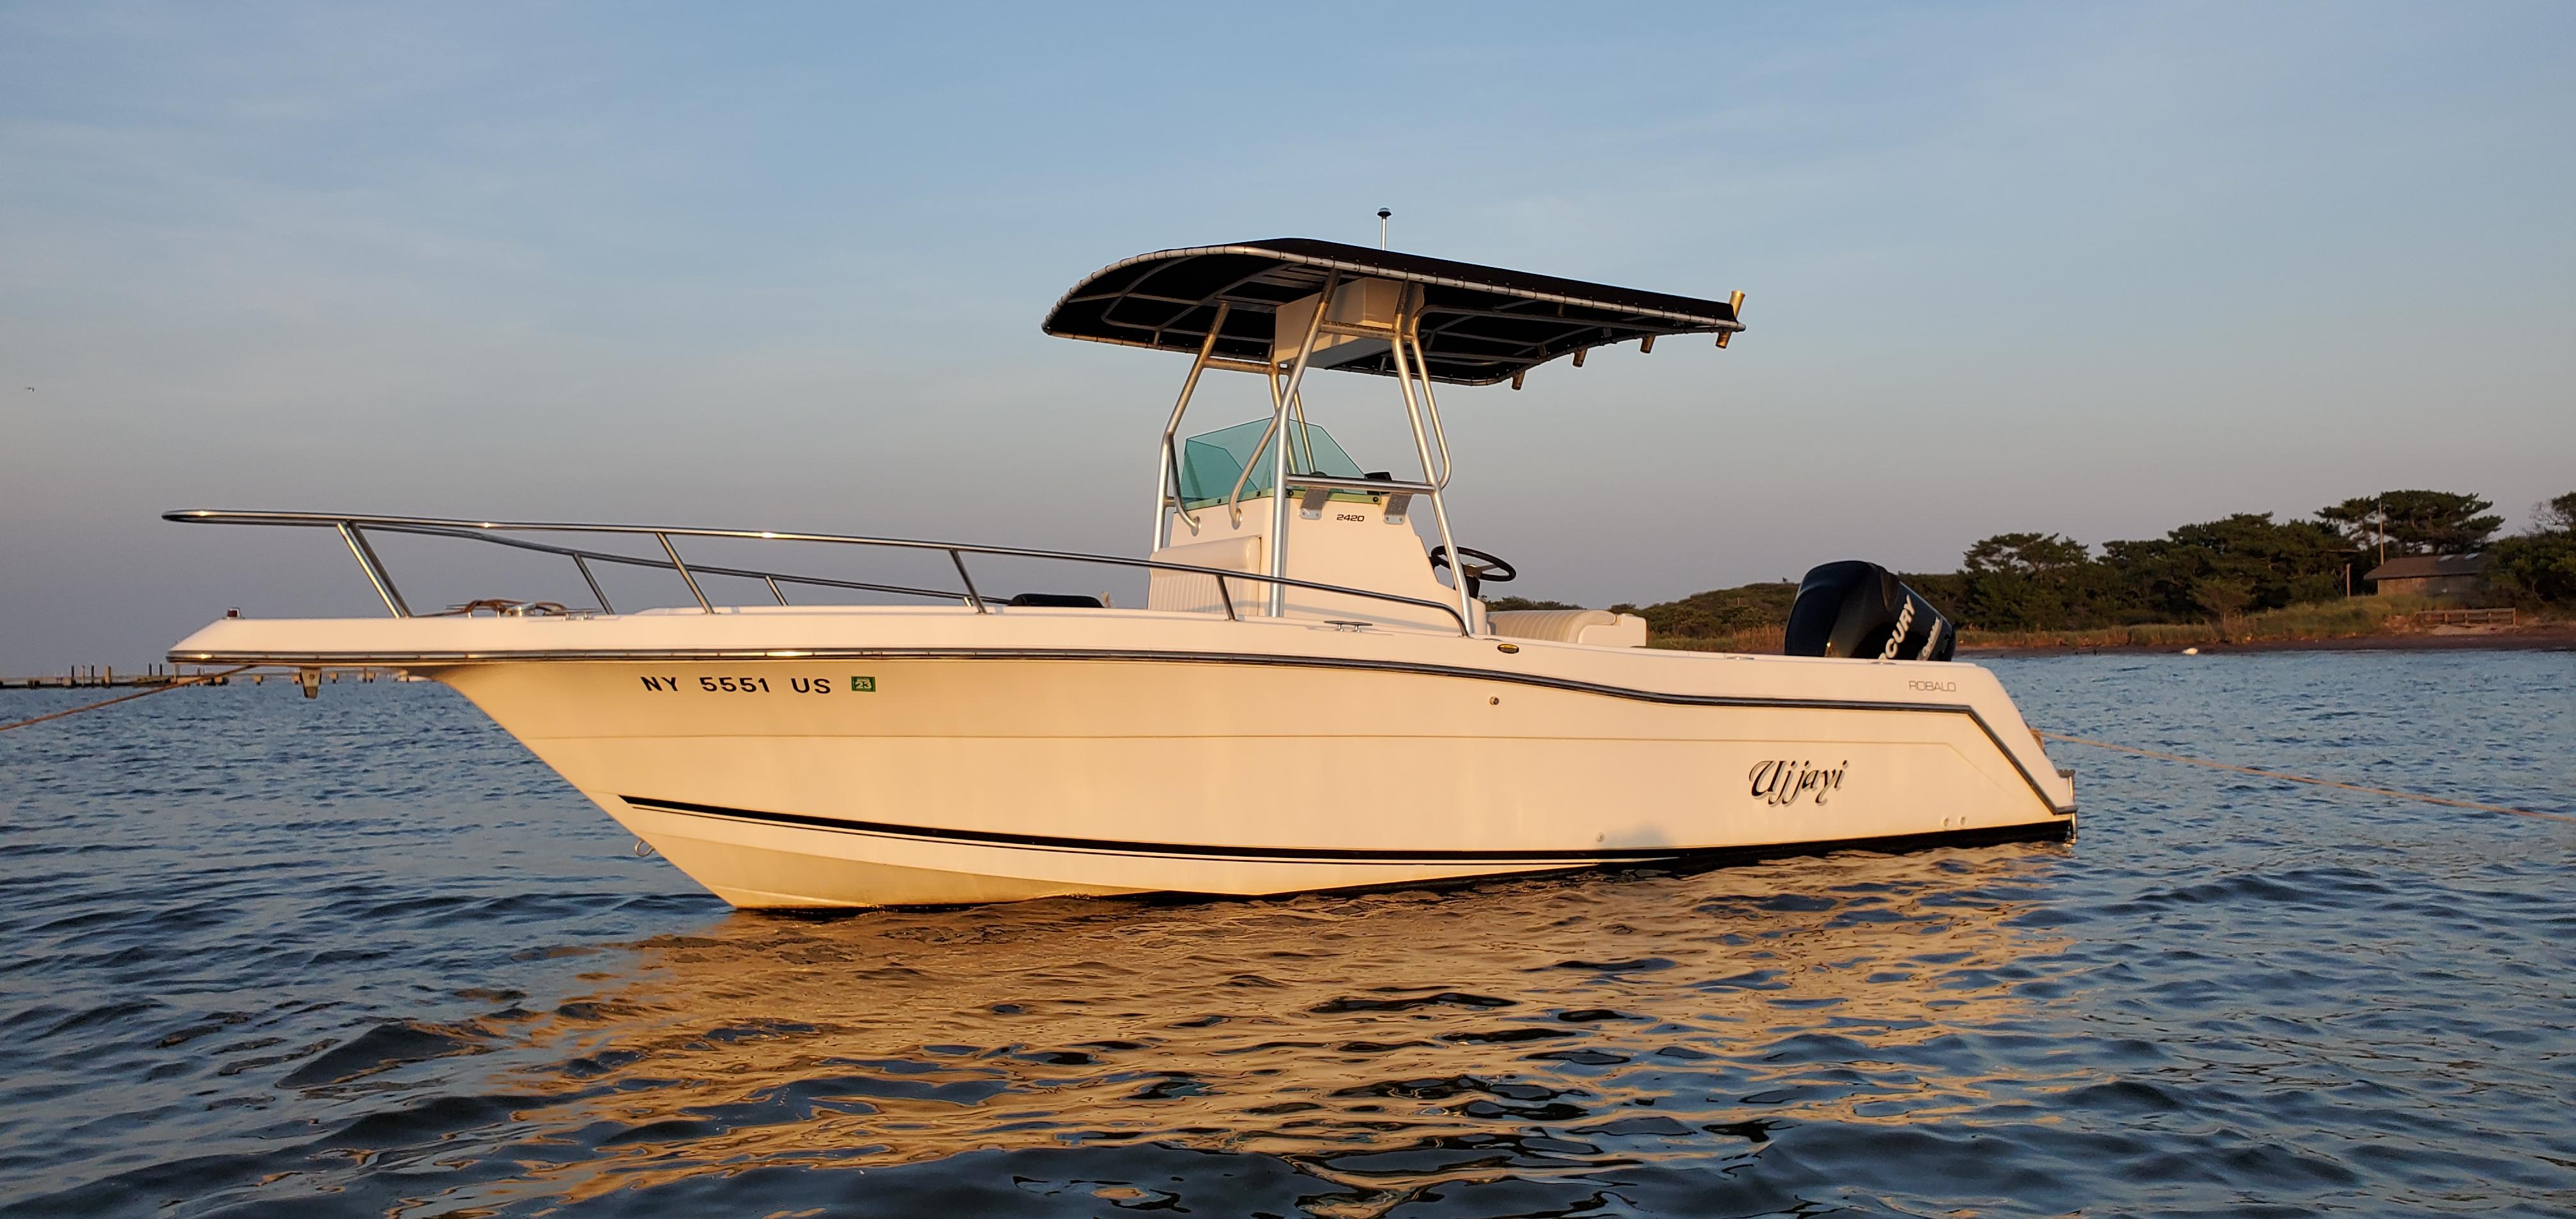 Used Robalo 2420 Center Console boats for sale - Singapore